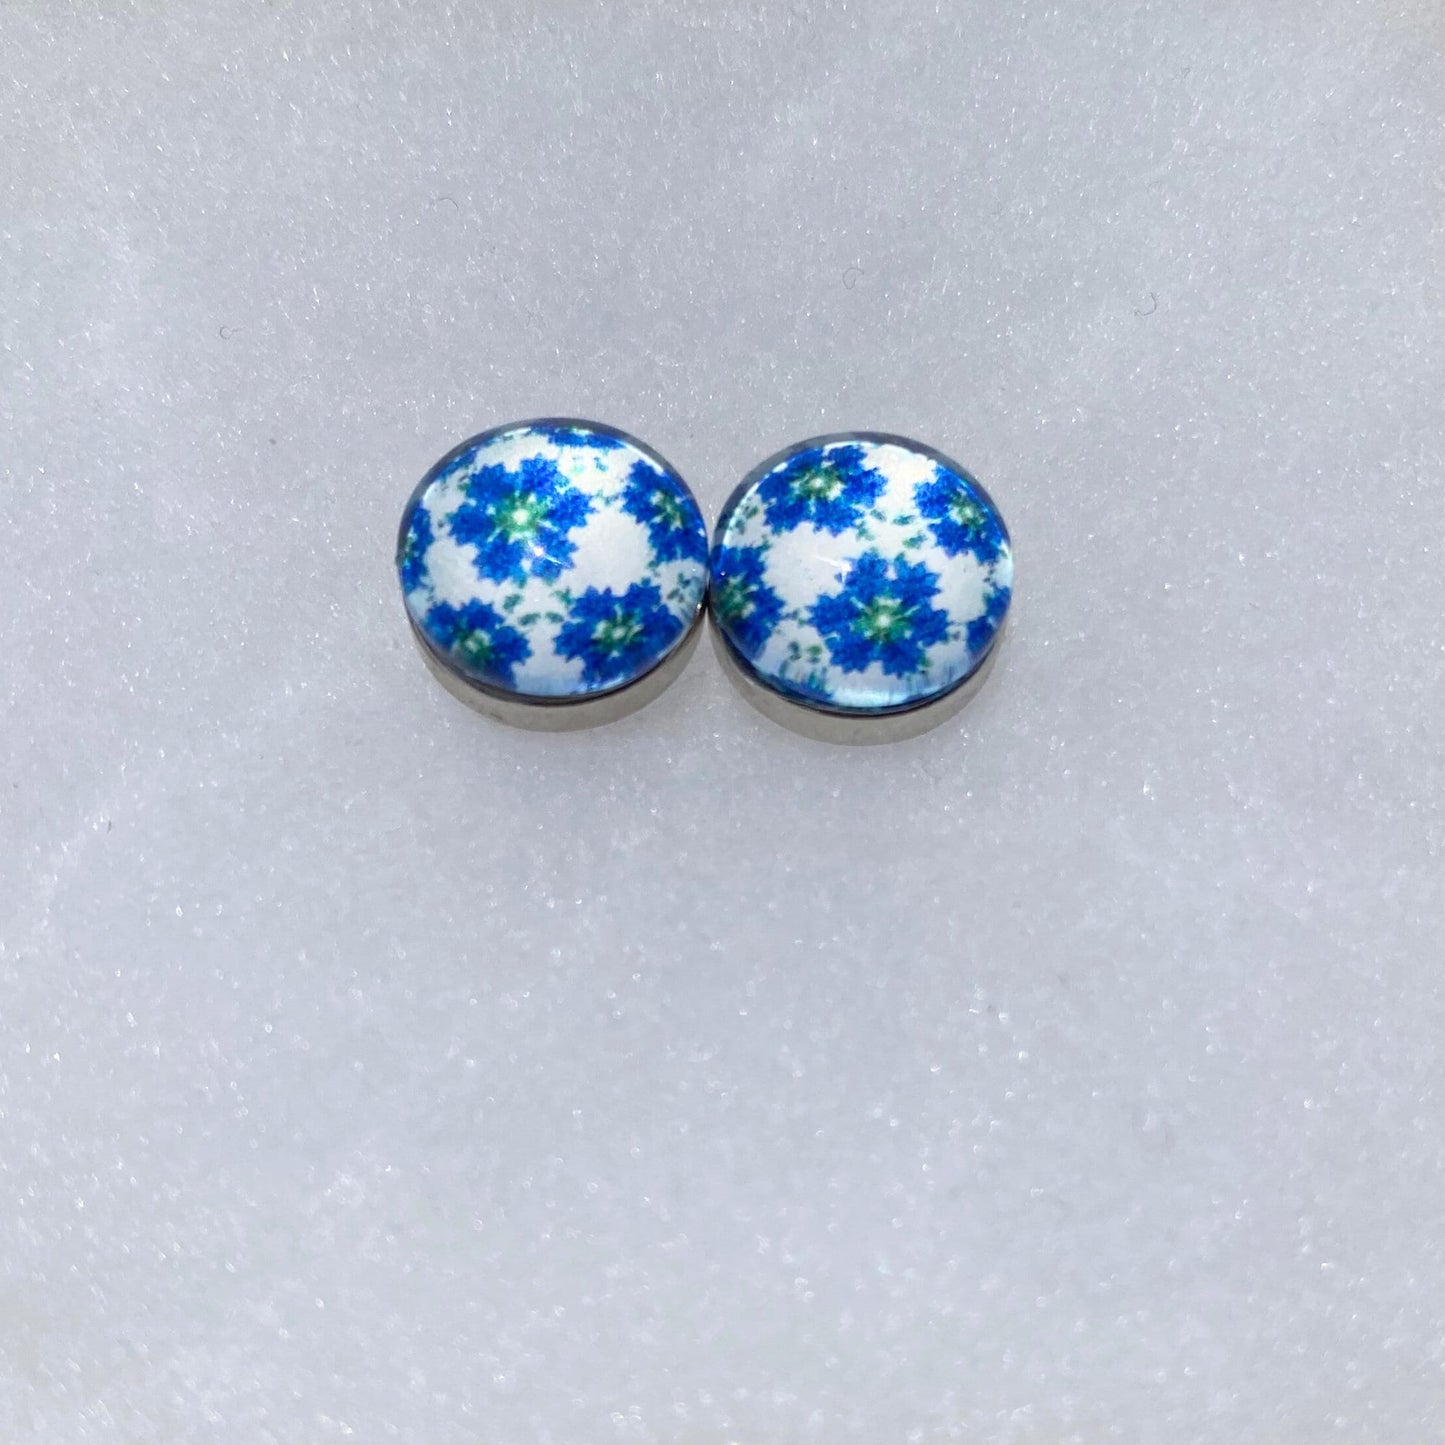 Hijab Magnets | Hijab Pins| Hijab Closure | Jeweled Scarf Accessories |Eid Muslim Gift | Blue White Floral Magnet | Scarf Magnet | FREE SHIP